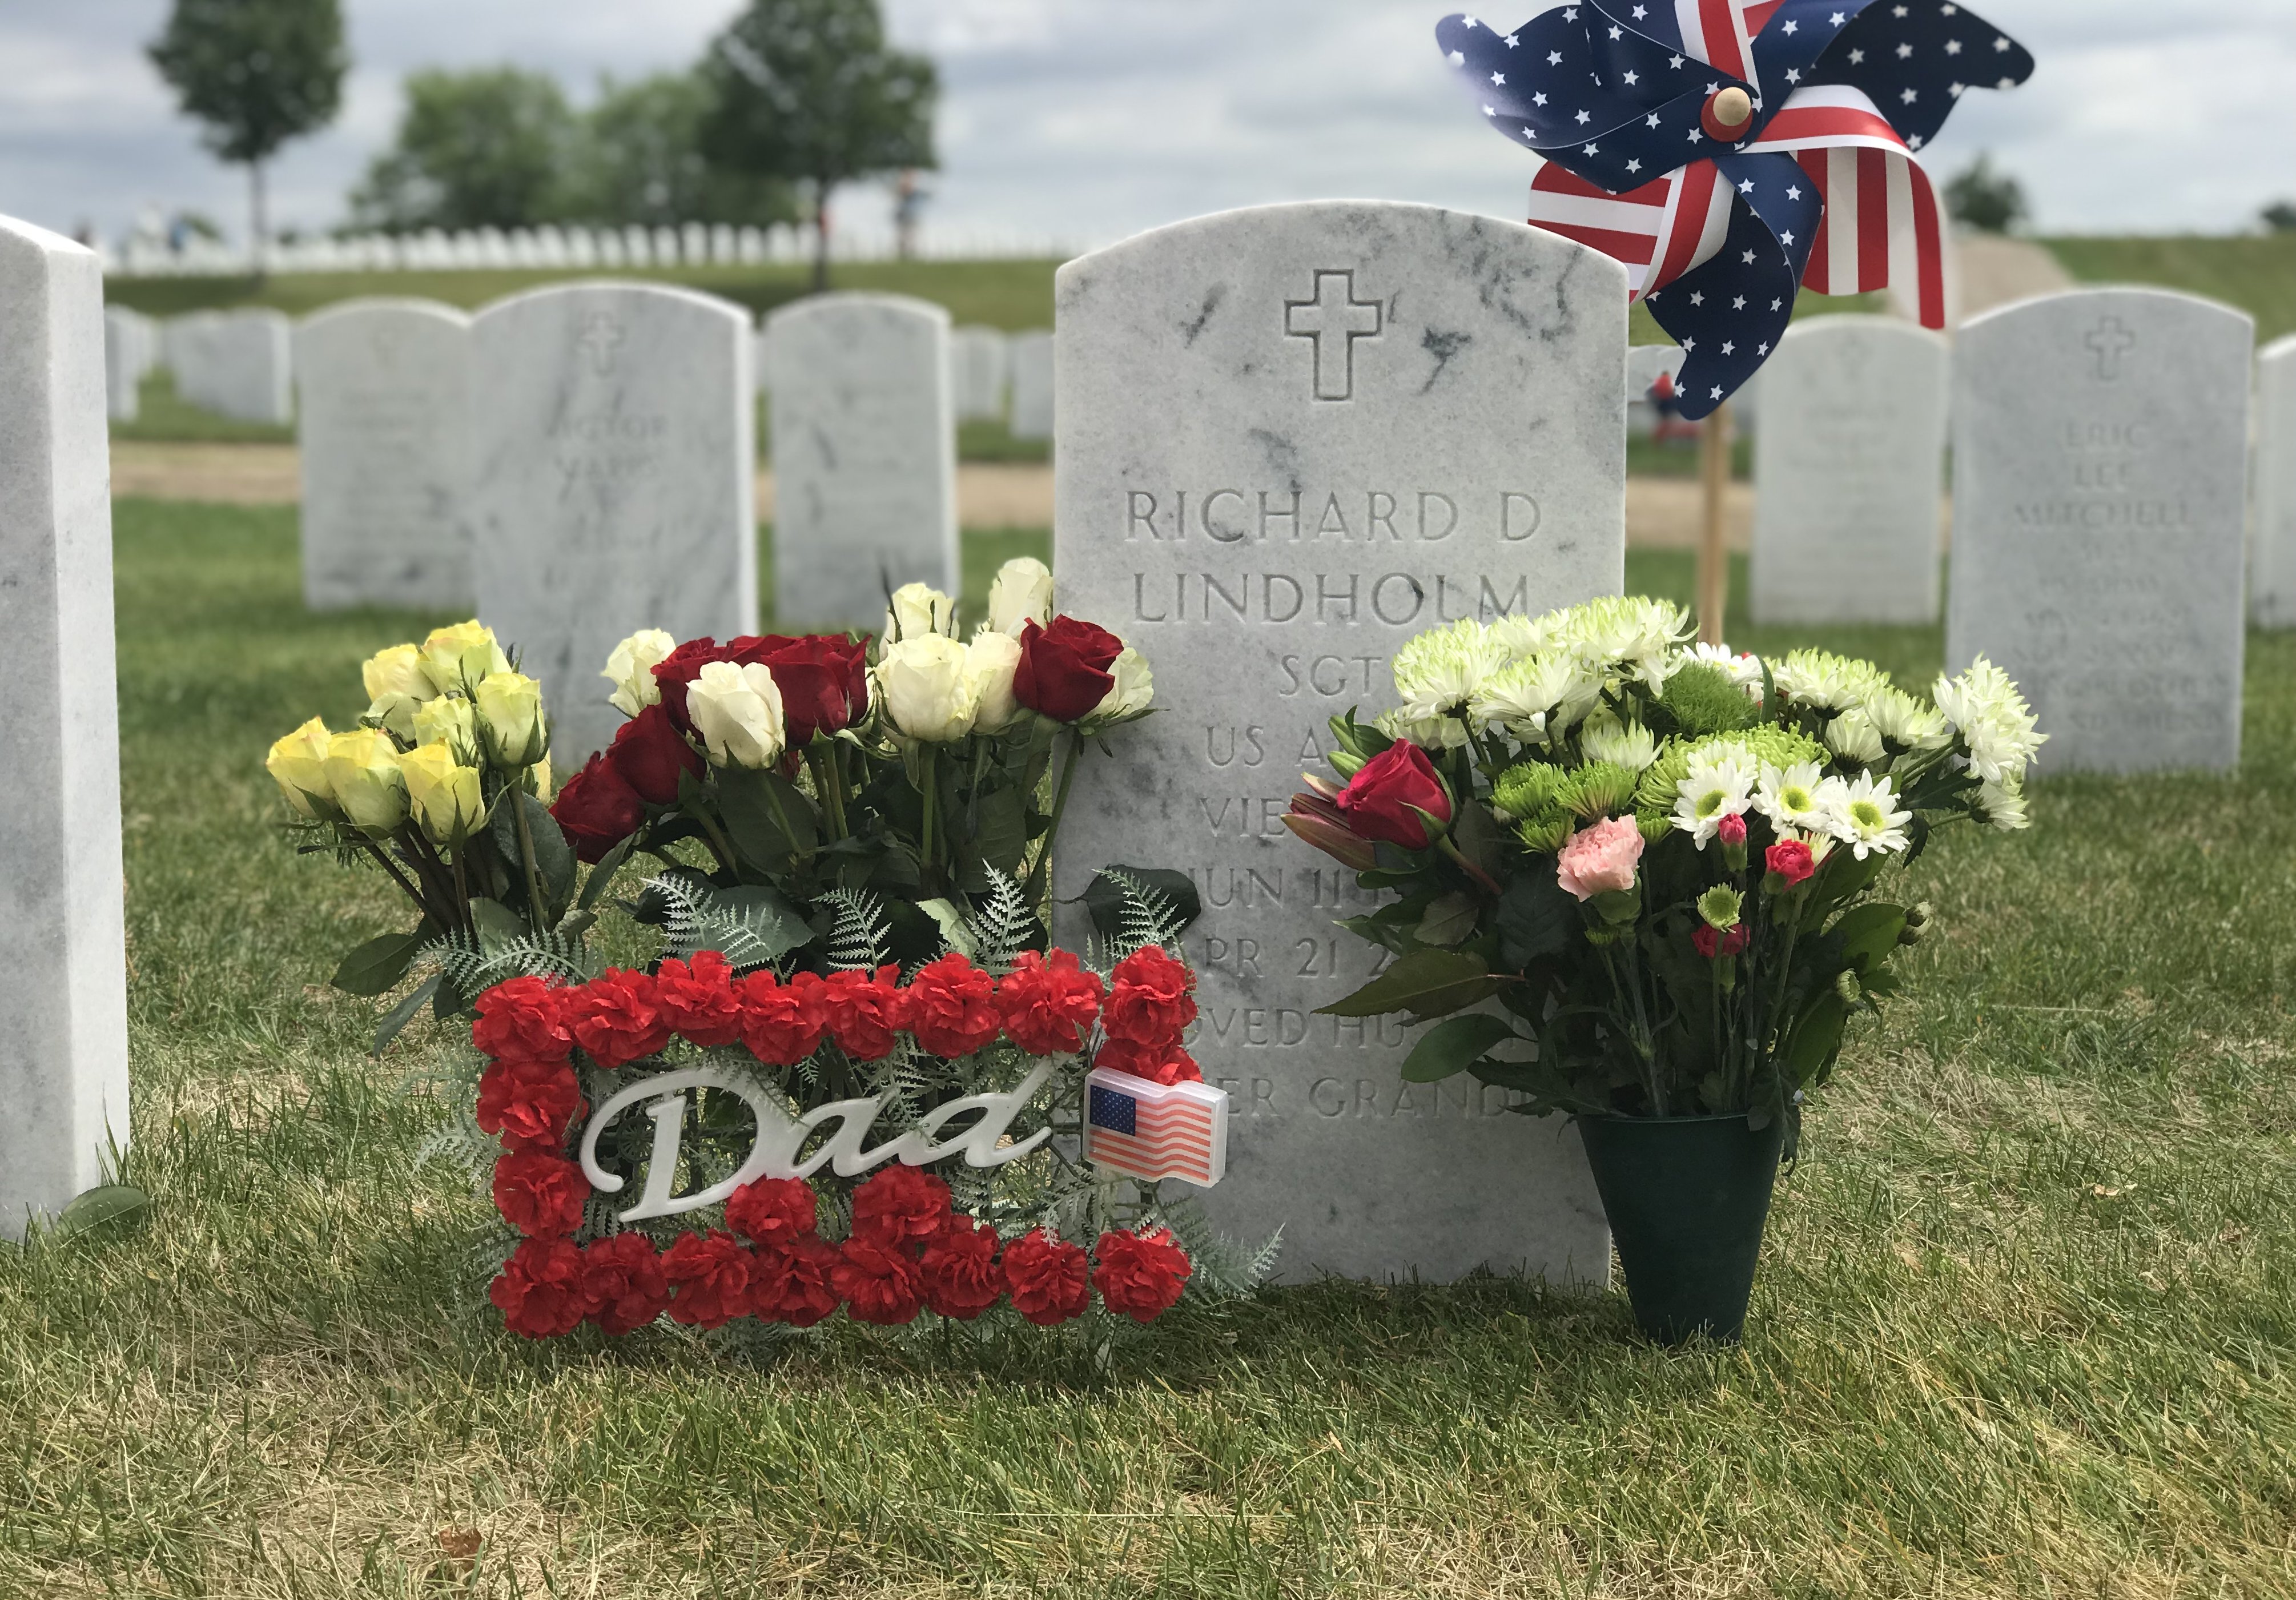 An official military grave marker for Richard D Lindholm, with flowers and an American flag pinwheel.